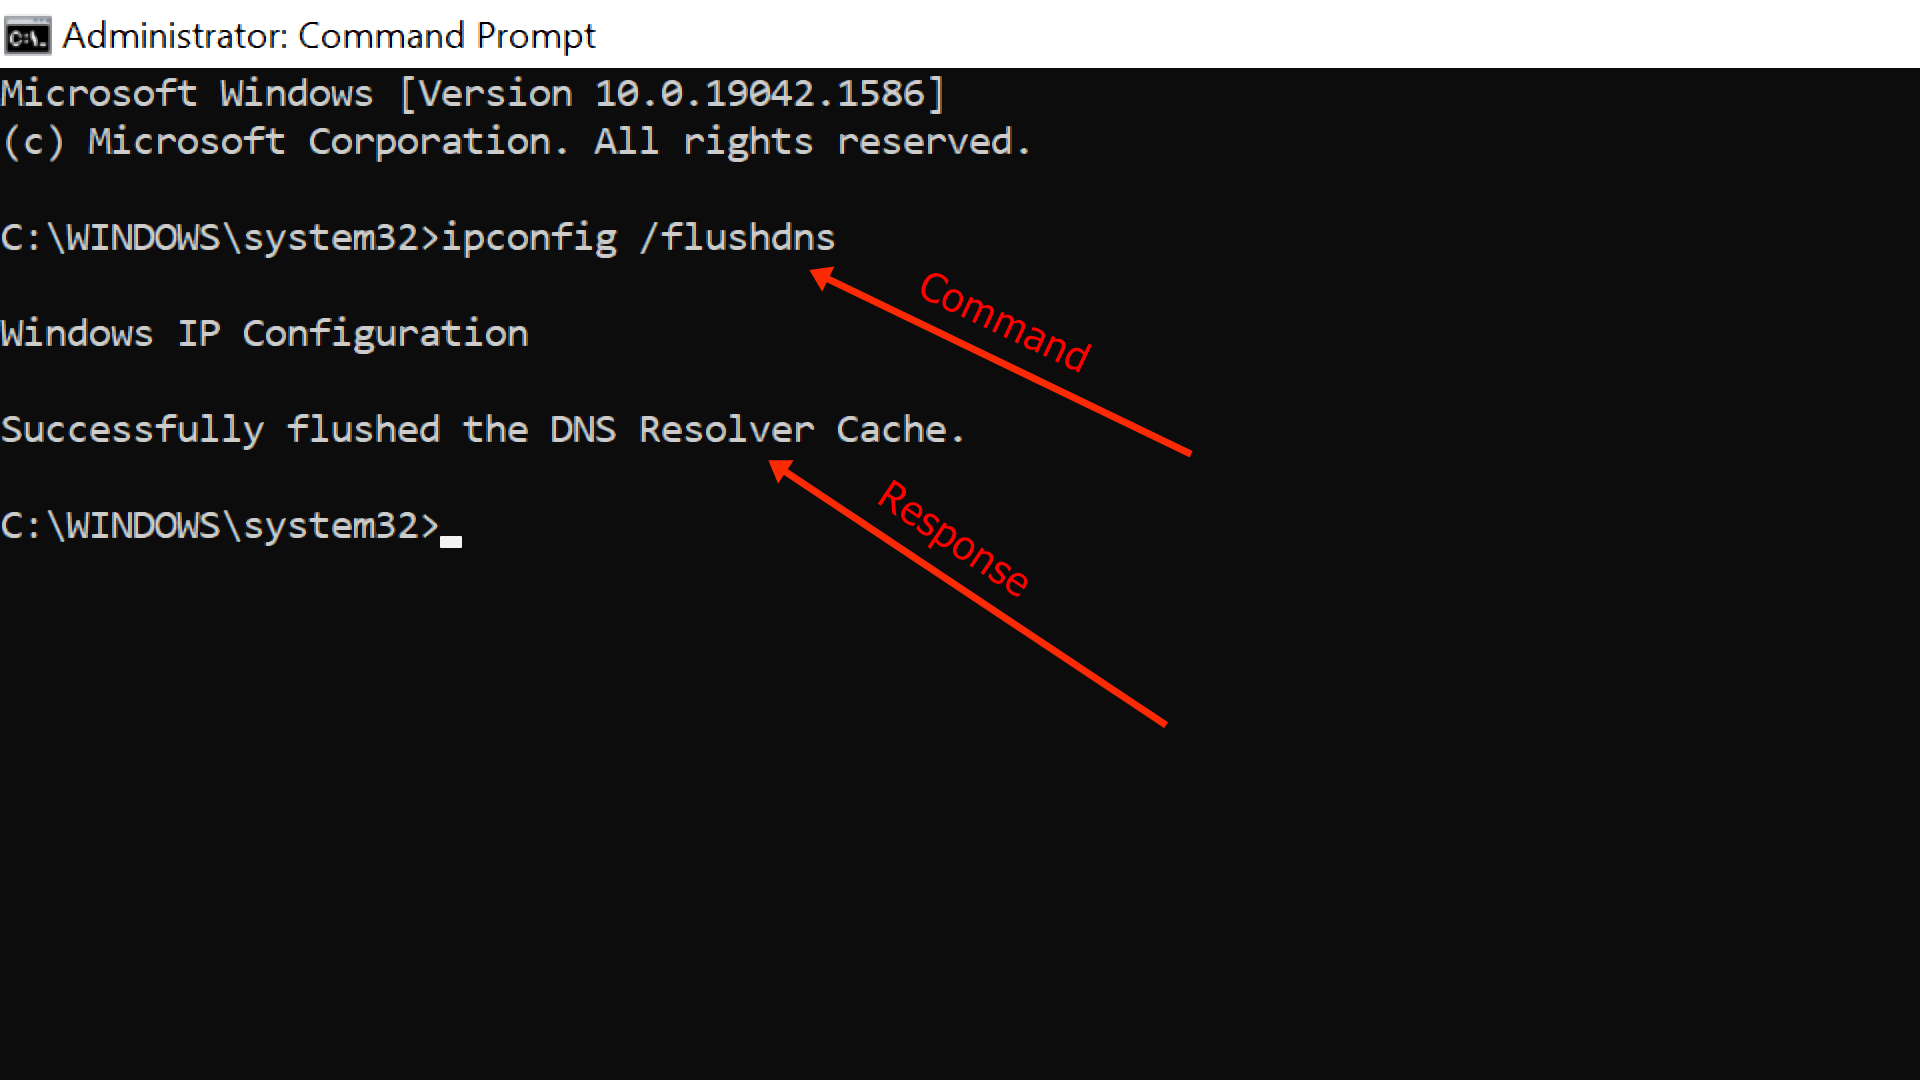 Type ipconfig /flushdns and press Enter.
Wait for the command to complete and then try to connect to the internet again.